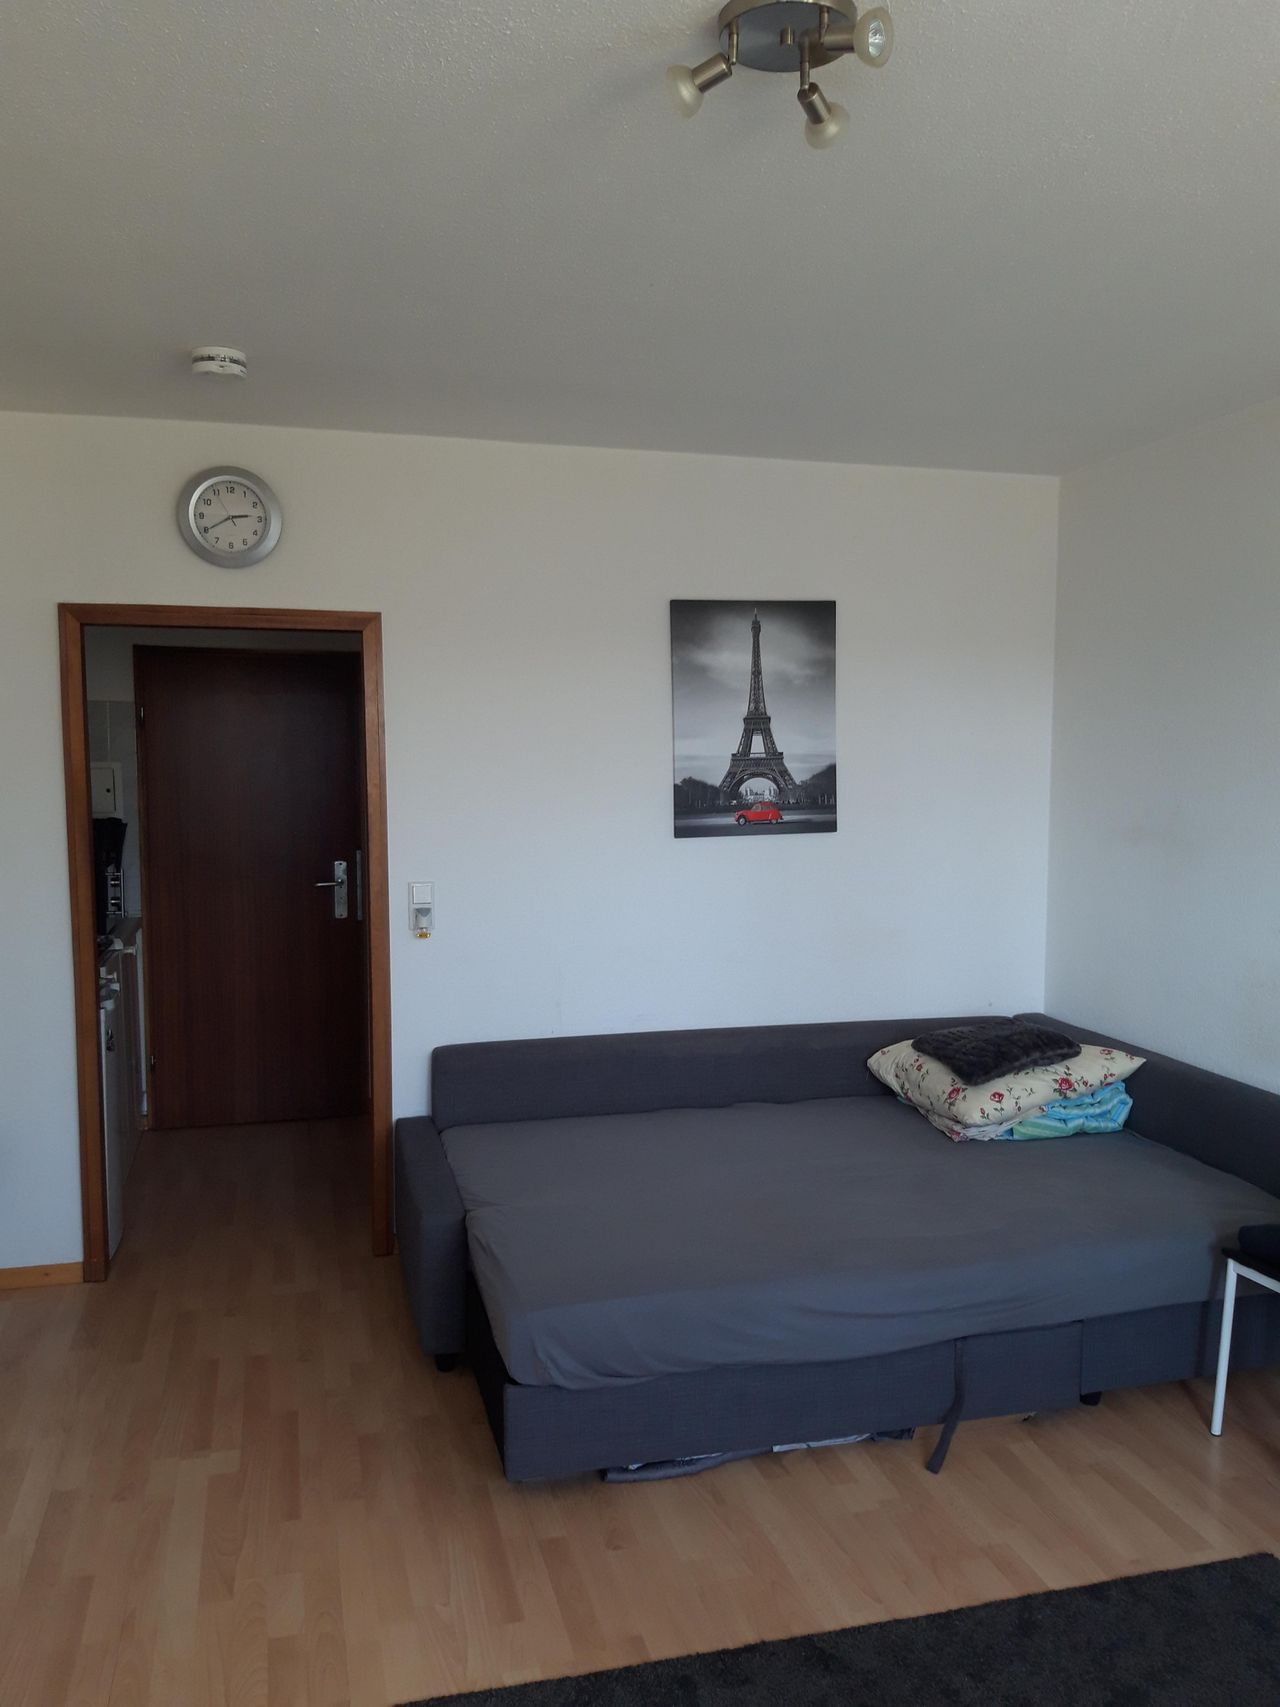 Small furnited Appartement, also for student in a searched area of Düsseldorf